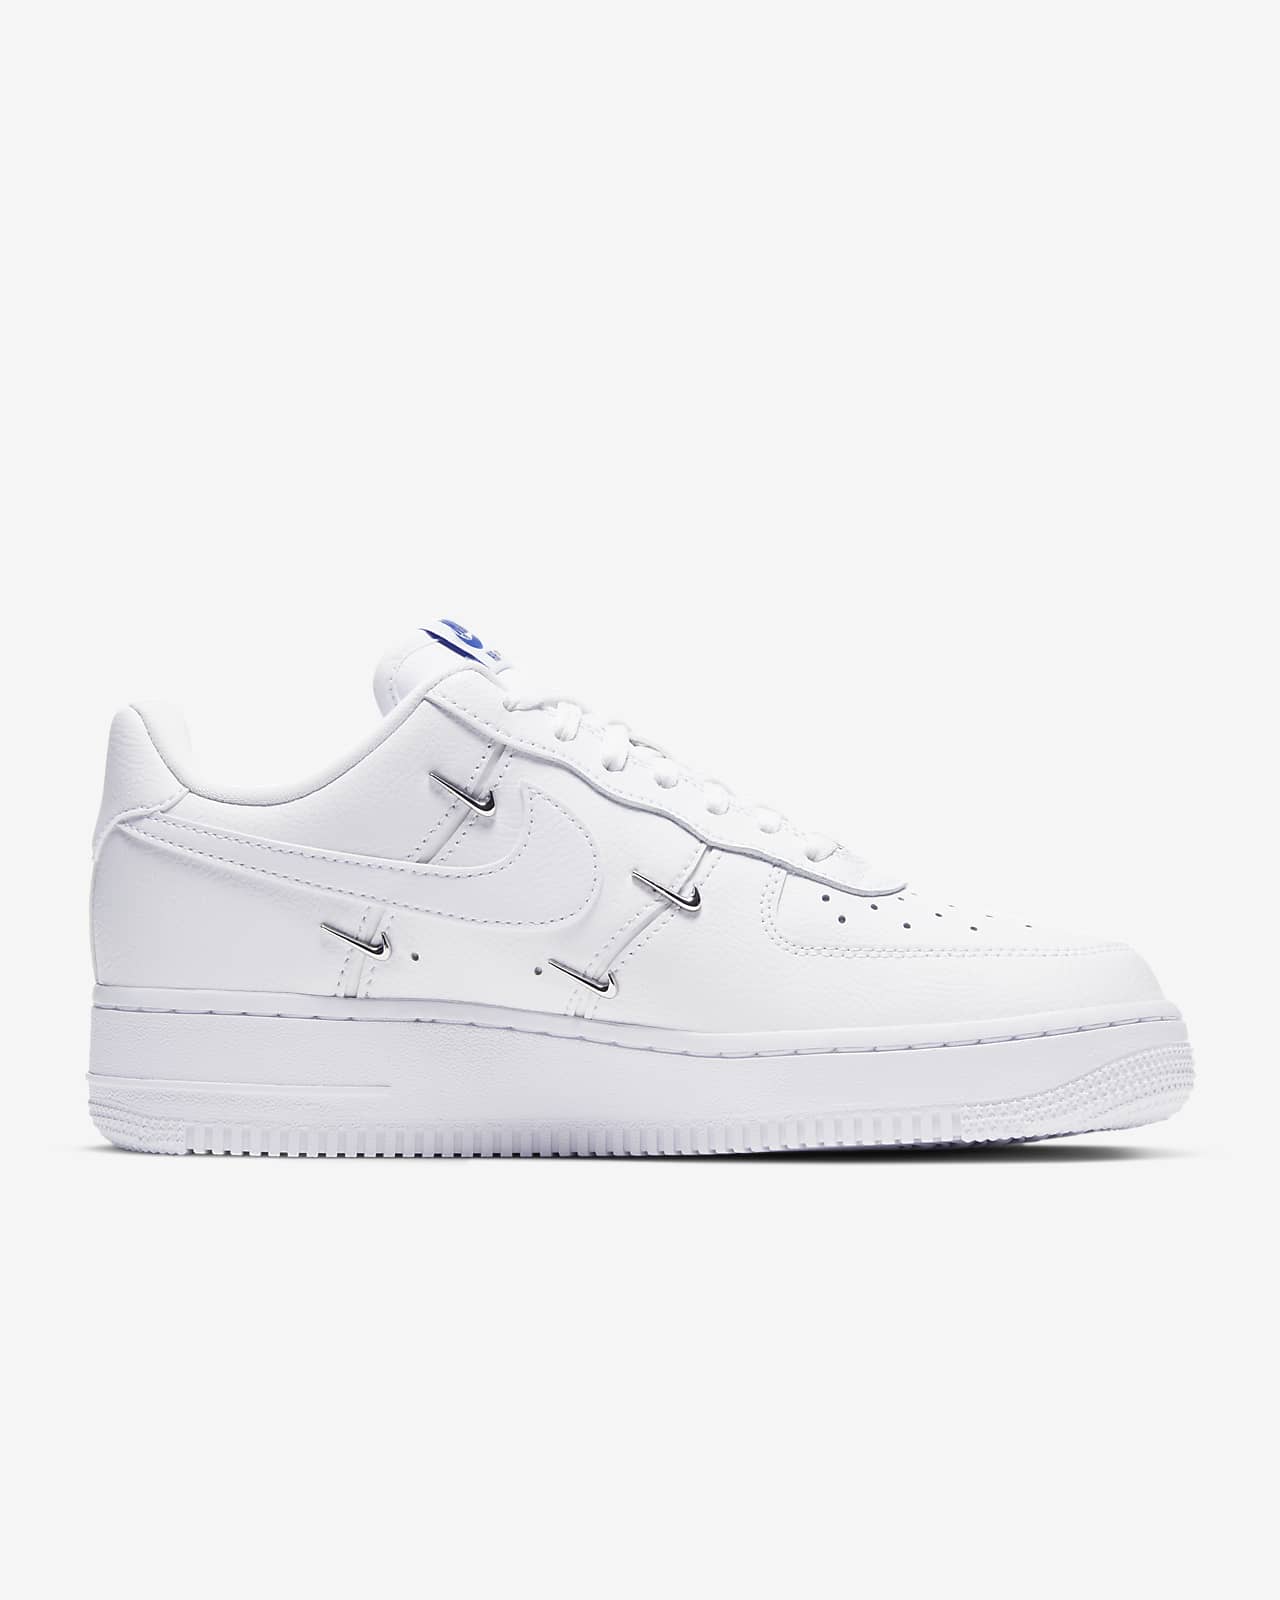 womens nike air force 1 07 size 7.5